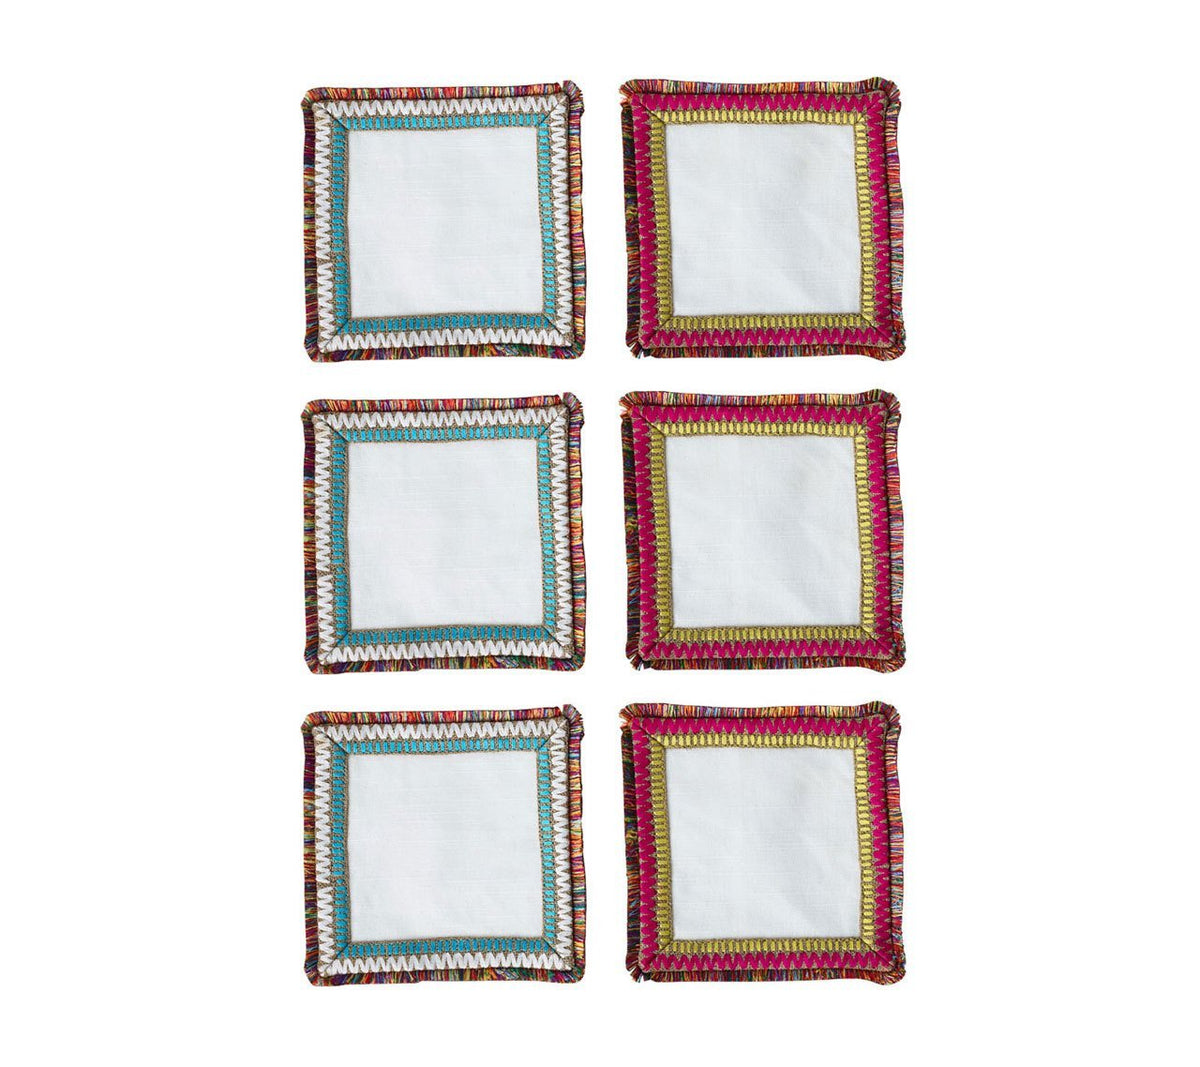 Spectrum Cocktail Napkins in White & Multi, Set of 6 in a Gift Box